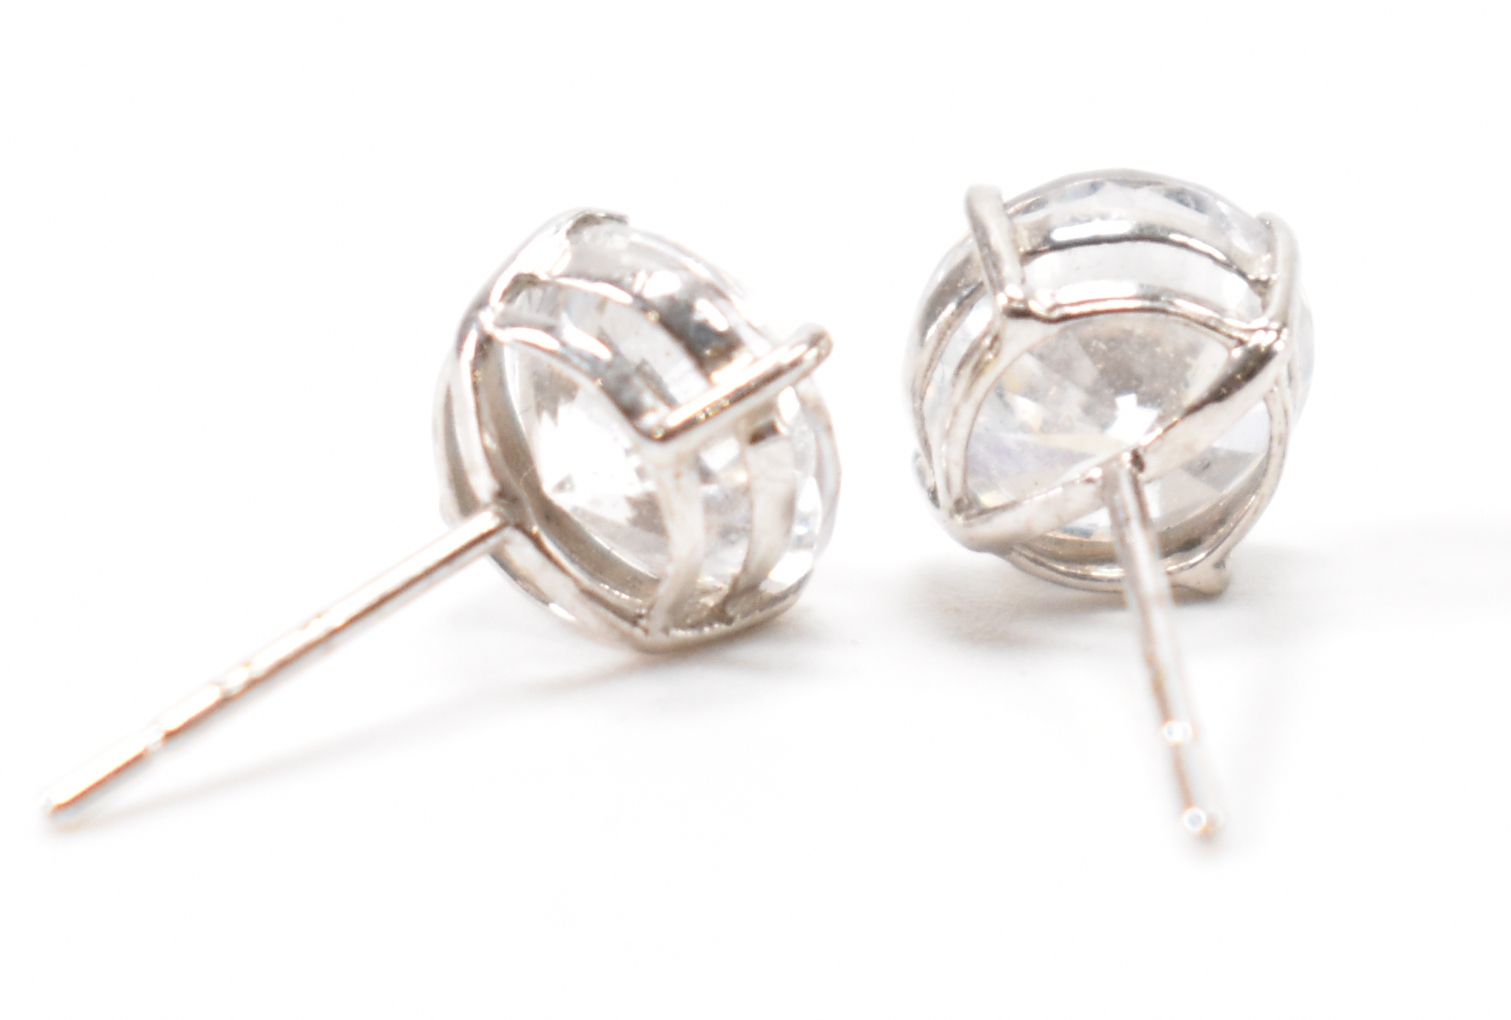 PAIR OF 9CT WHITE GOLD & CZ STUD EARRINGS - Image 3 of 5